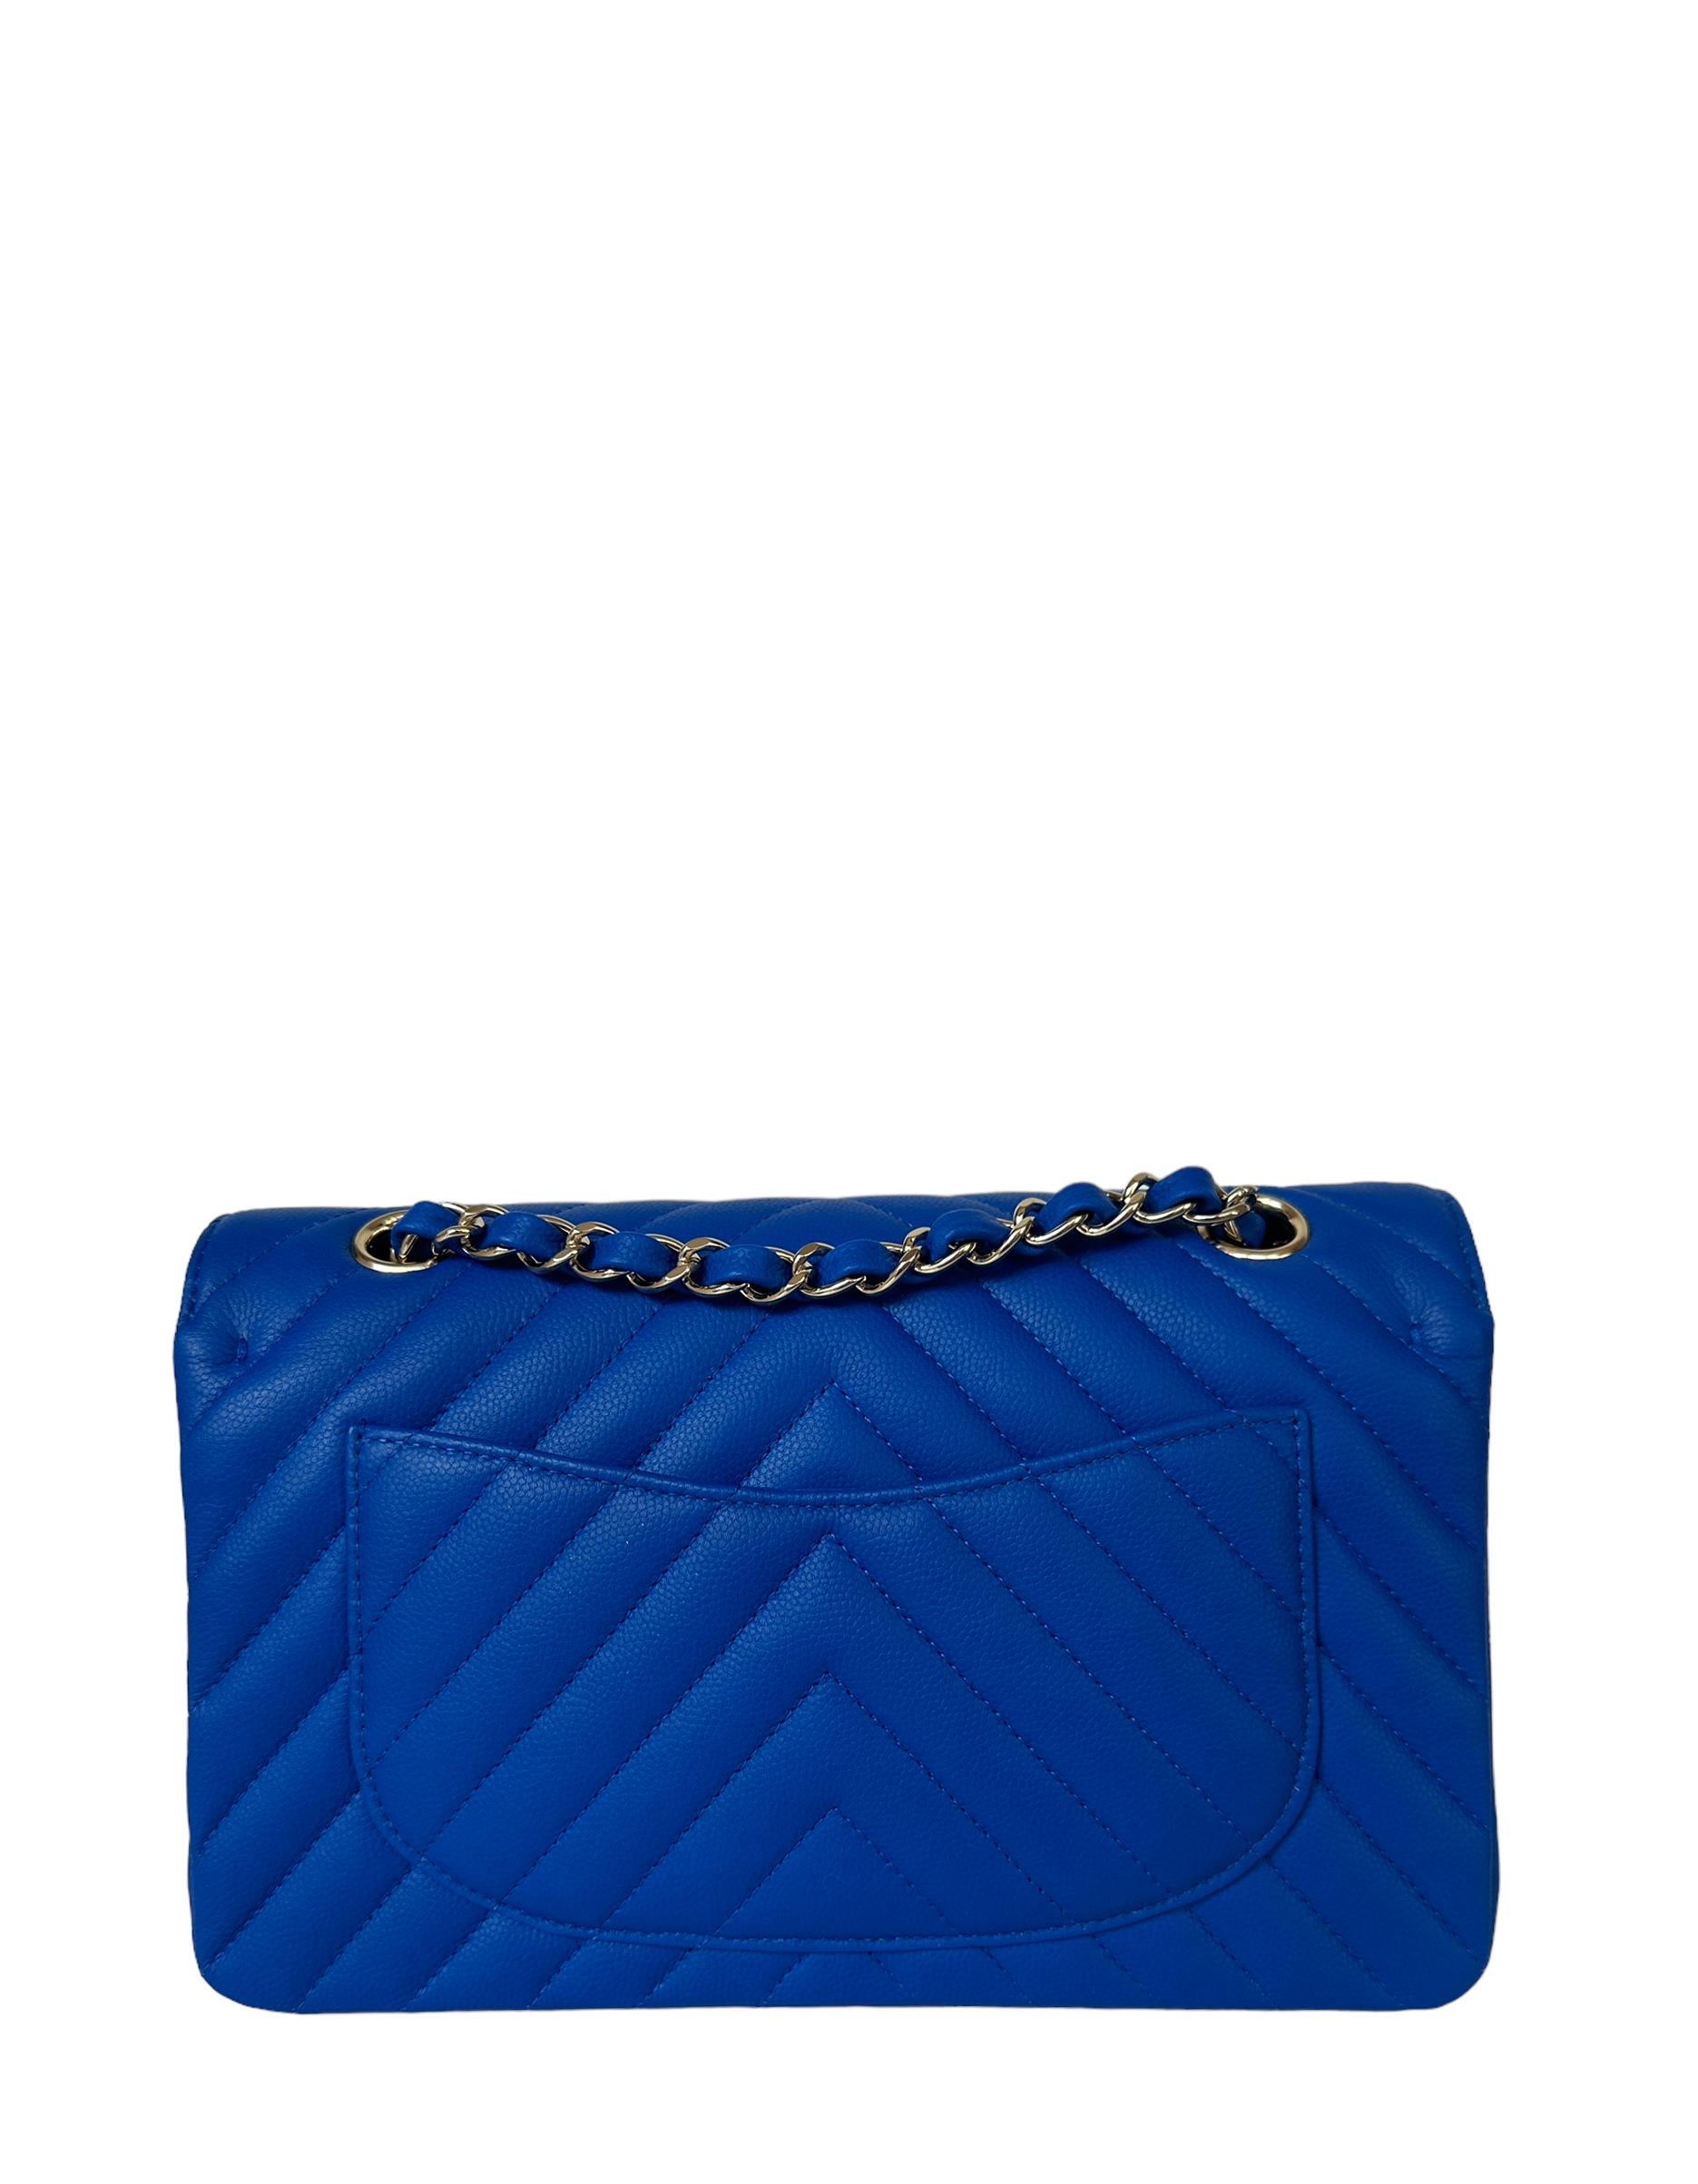 Chanel Cobalt Blue Caviar Leather Chevron Small Double Flap Classic Bag In Excellent Condition For Sale In New York, NY